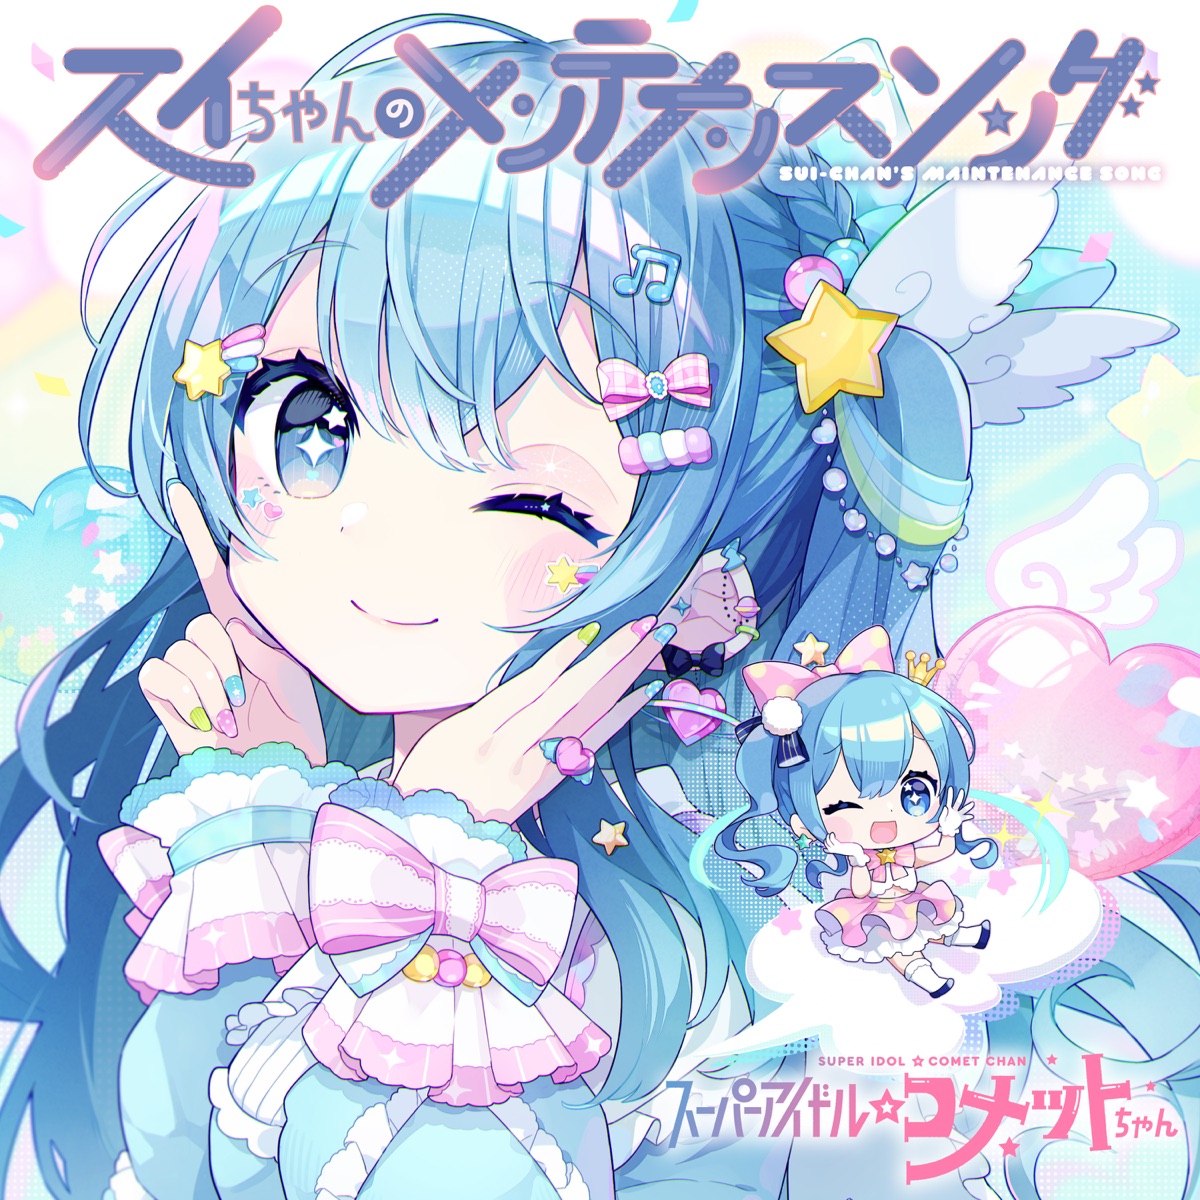 Cover art for『Hoshimachi Suisei - Sui-chan no Maintenance Song』from the release『Sui-chan no Maintenance Song』